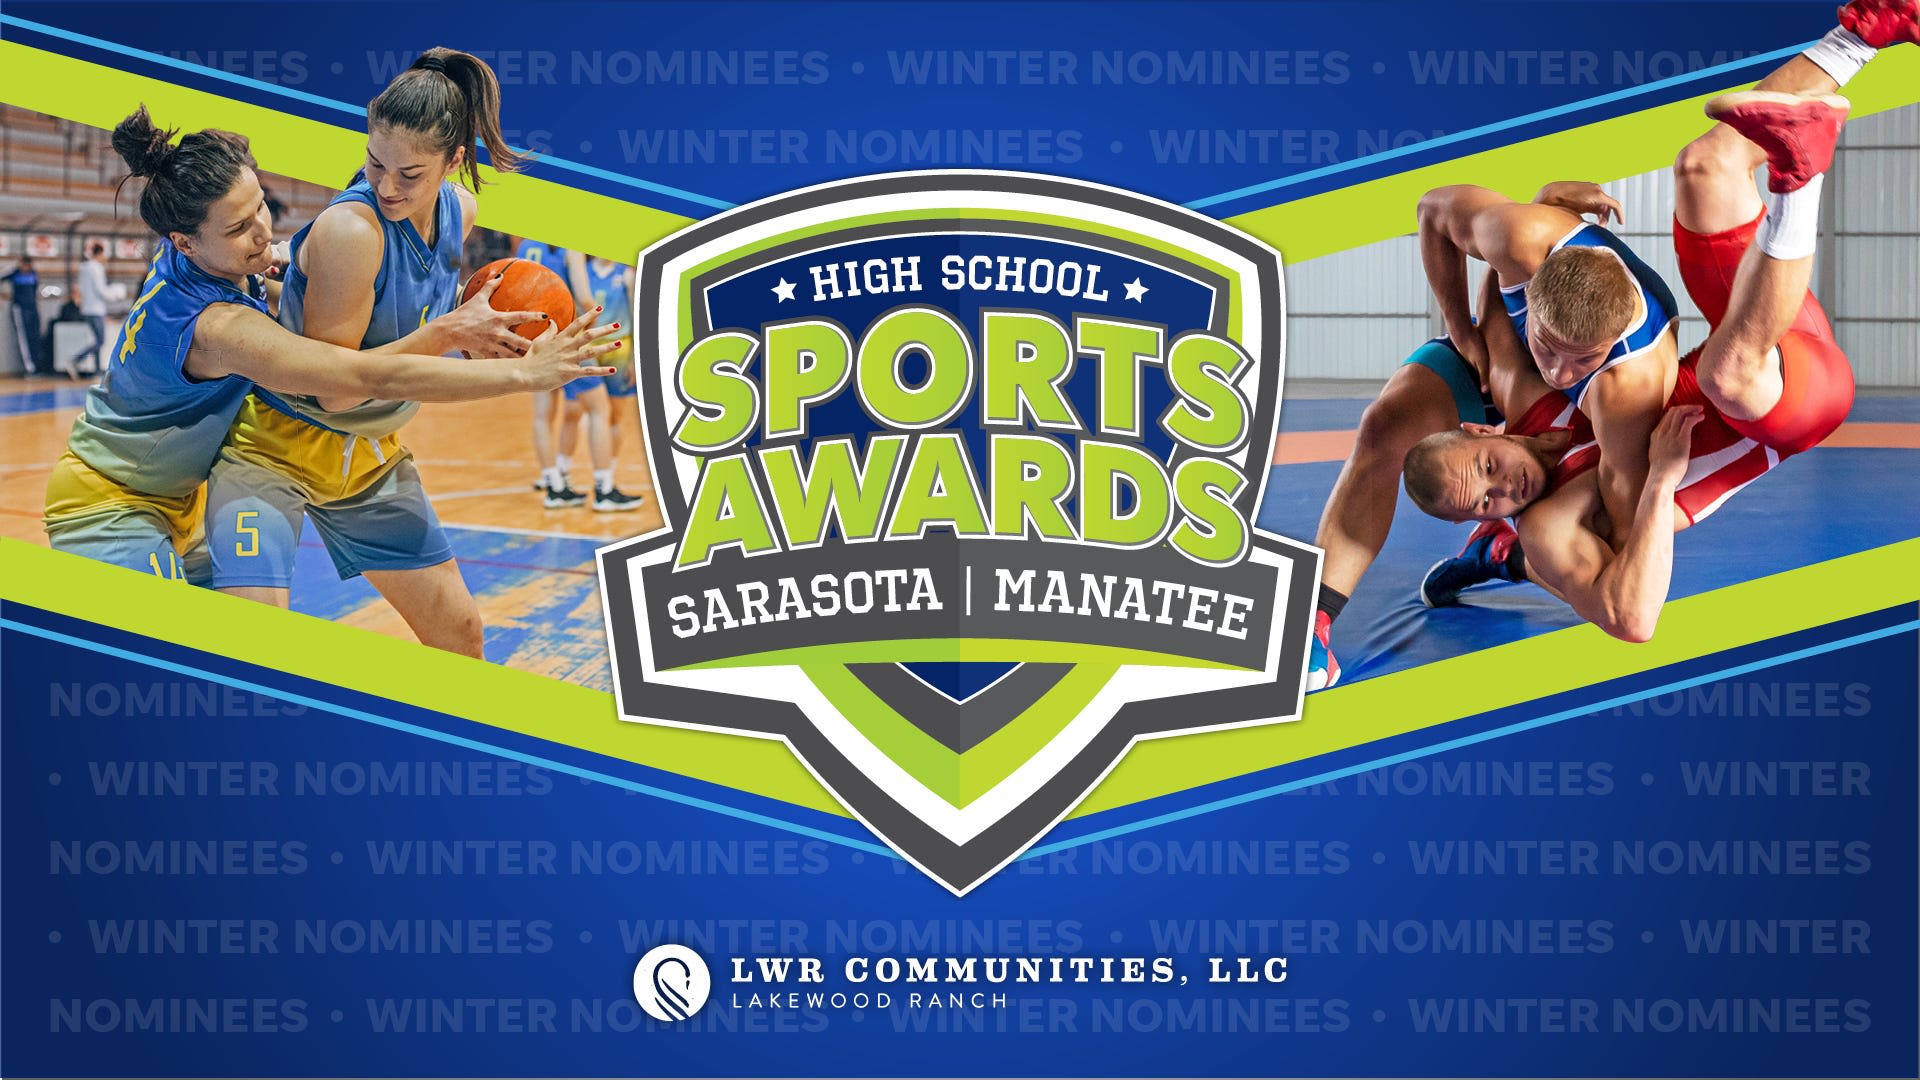 See all winter nominees for the Sarasota-Manatee High School Sports Awards